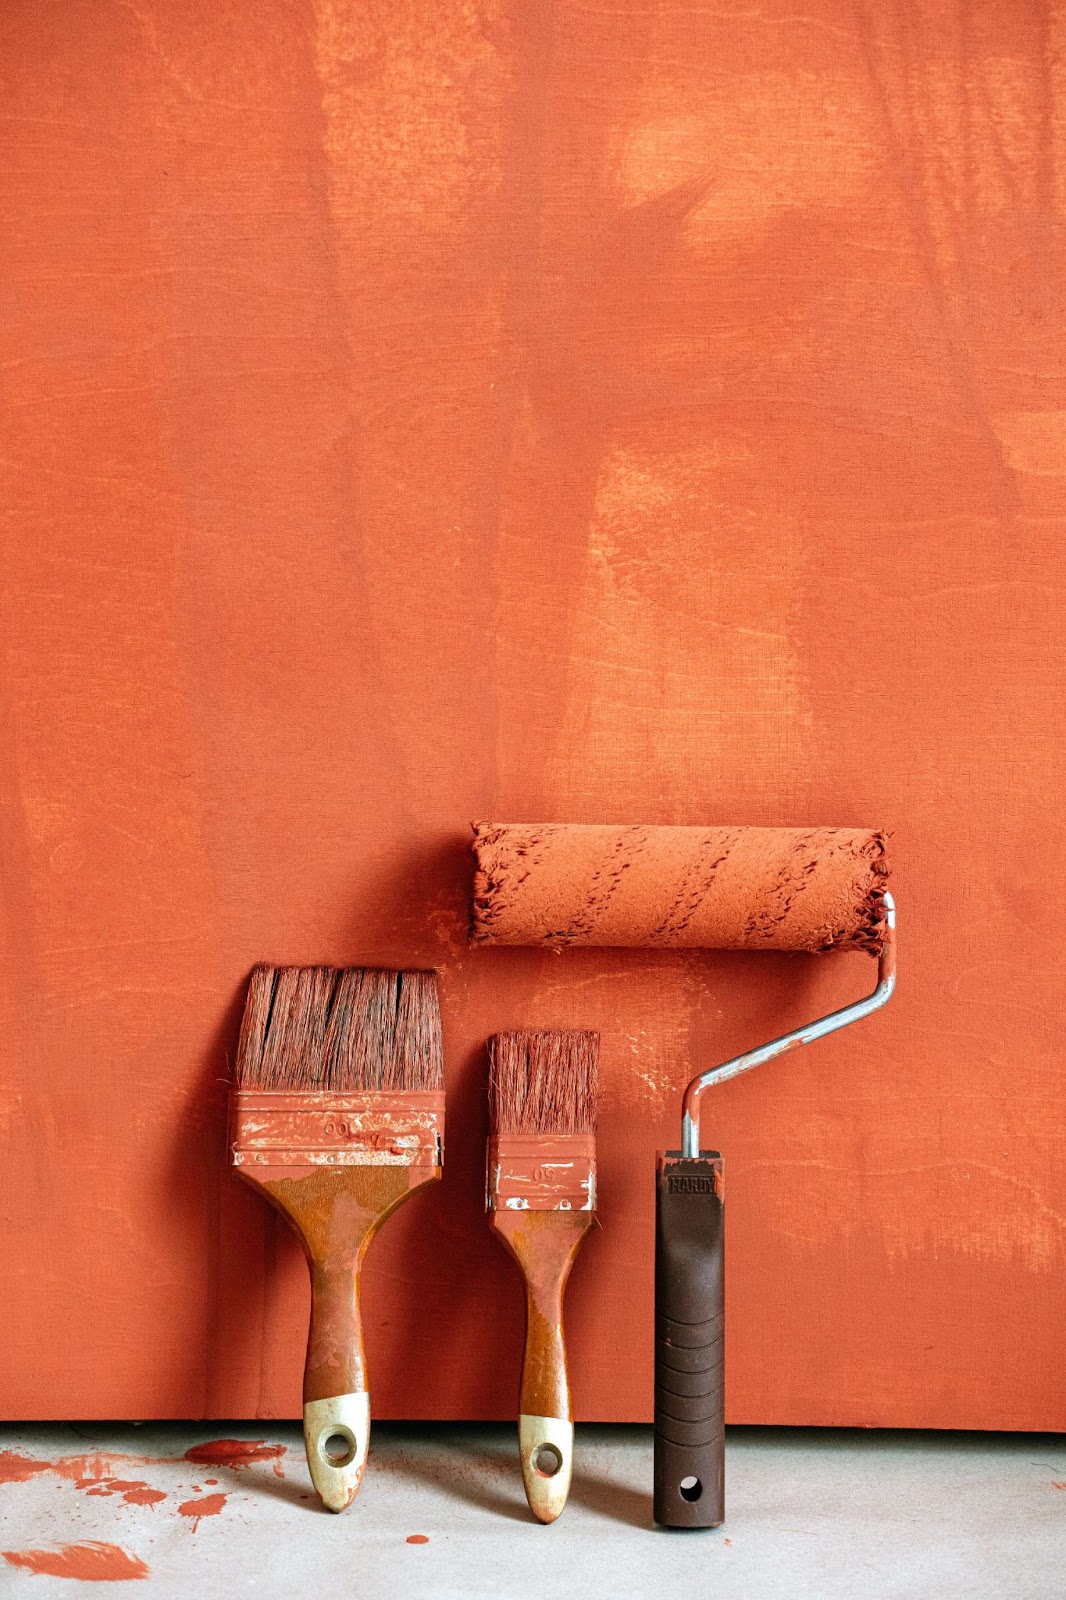 Painting is a crucial part of Airbnb maintenance that keeps your short-term rental property looking fresh.